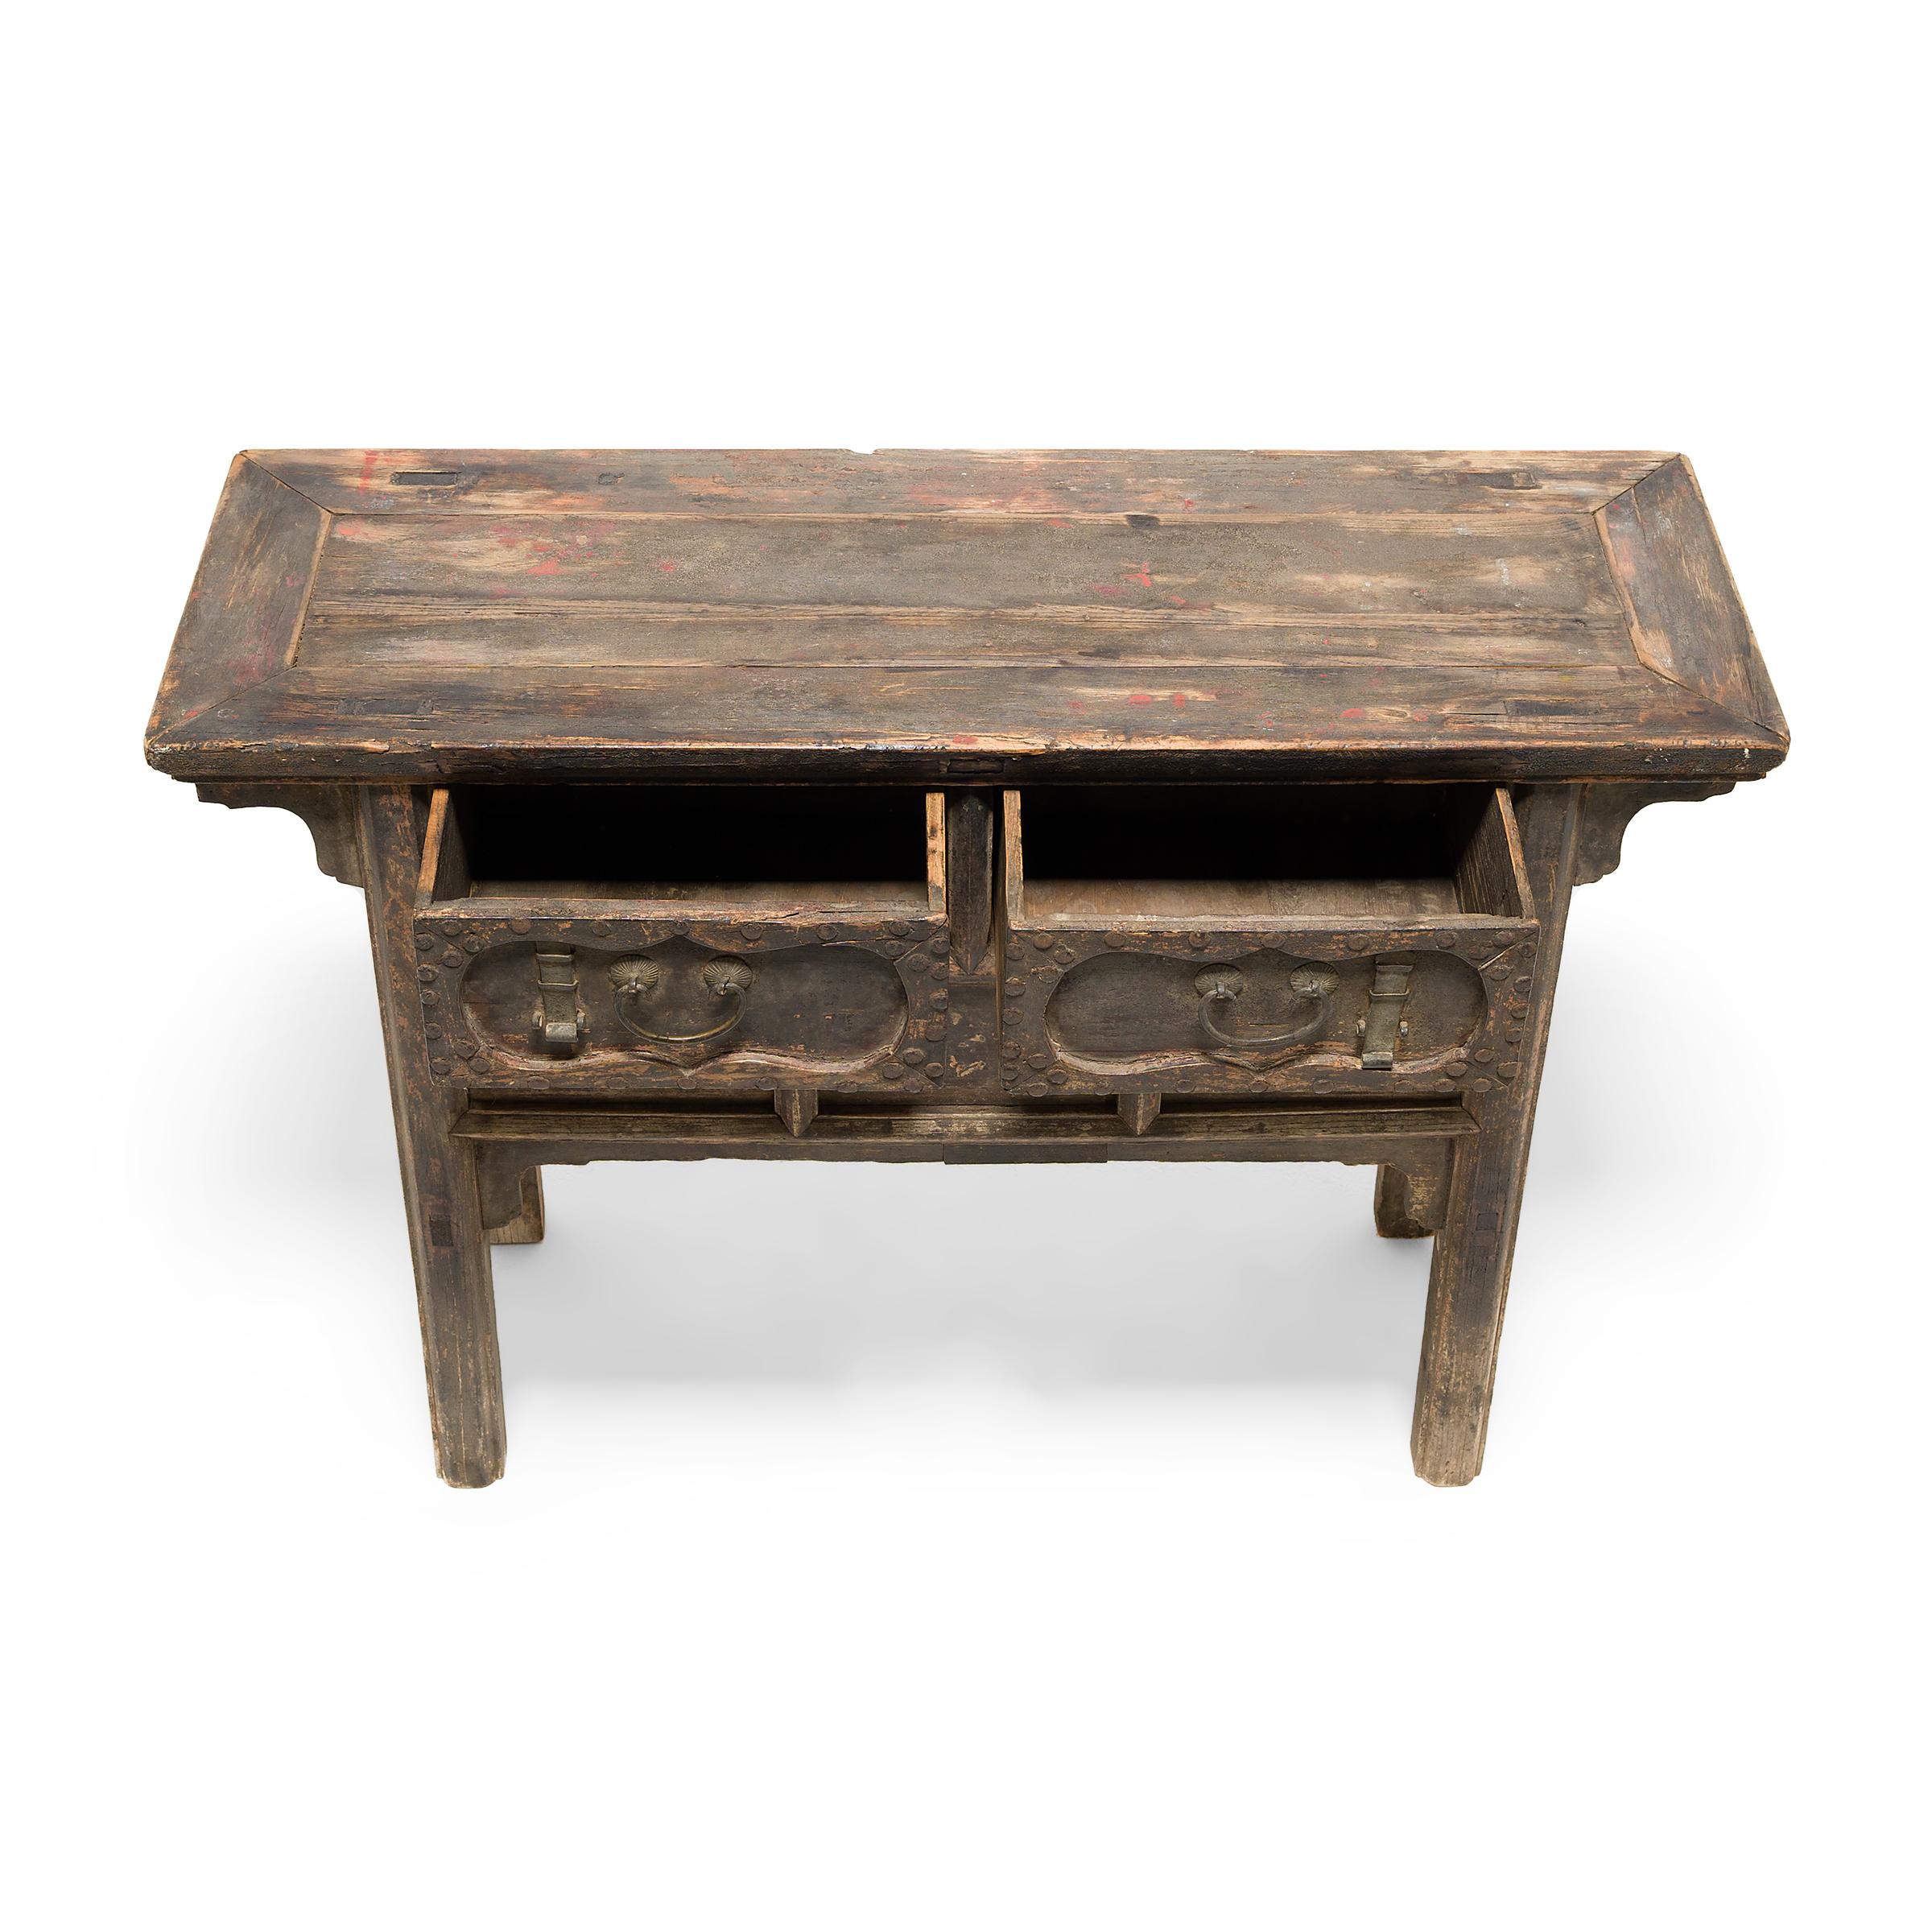 Iron Chinese Two Drawer Offering Table, c. 1800